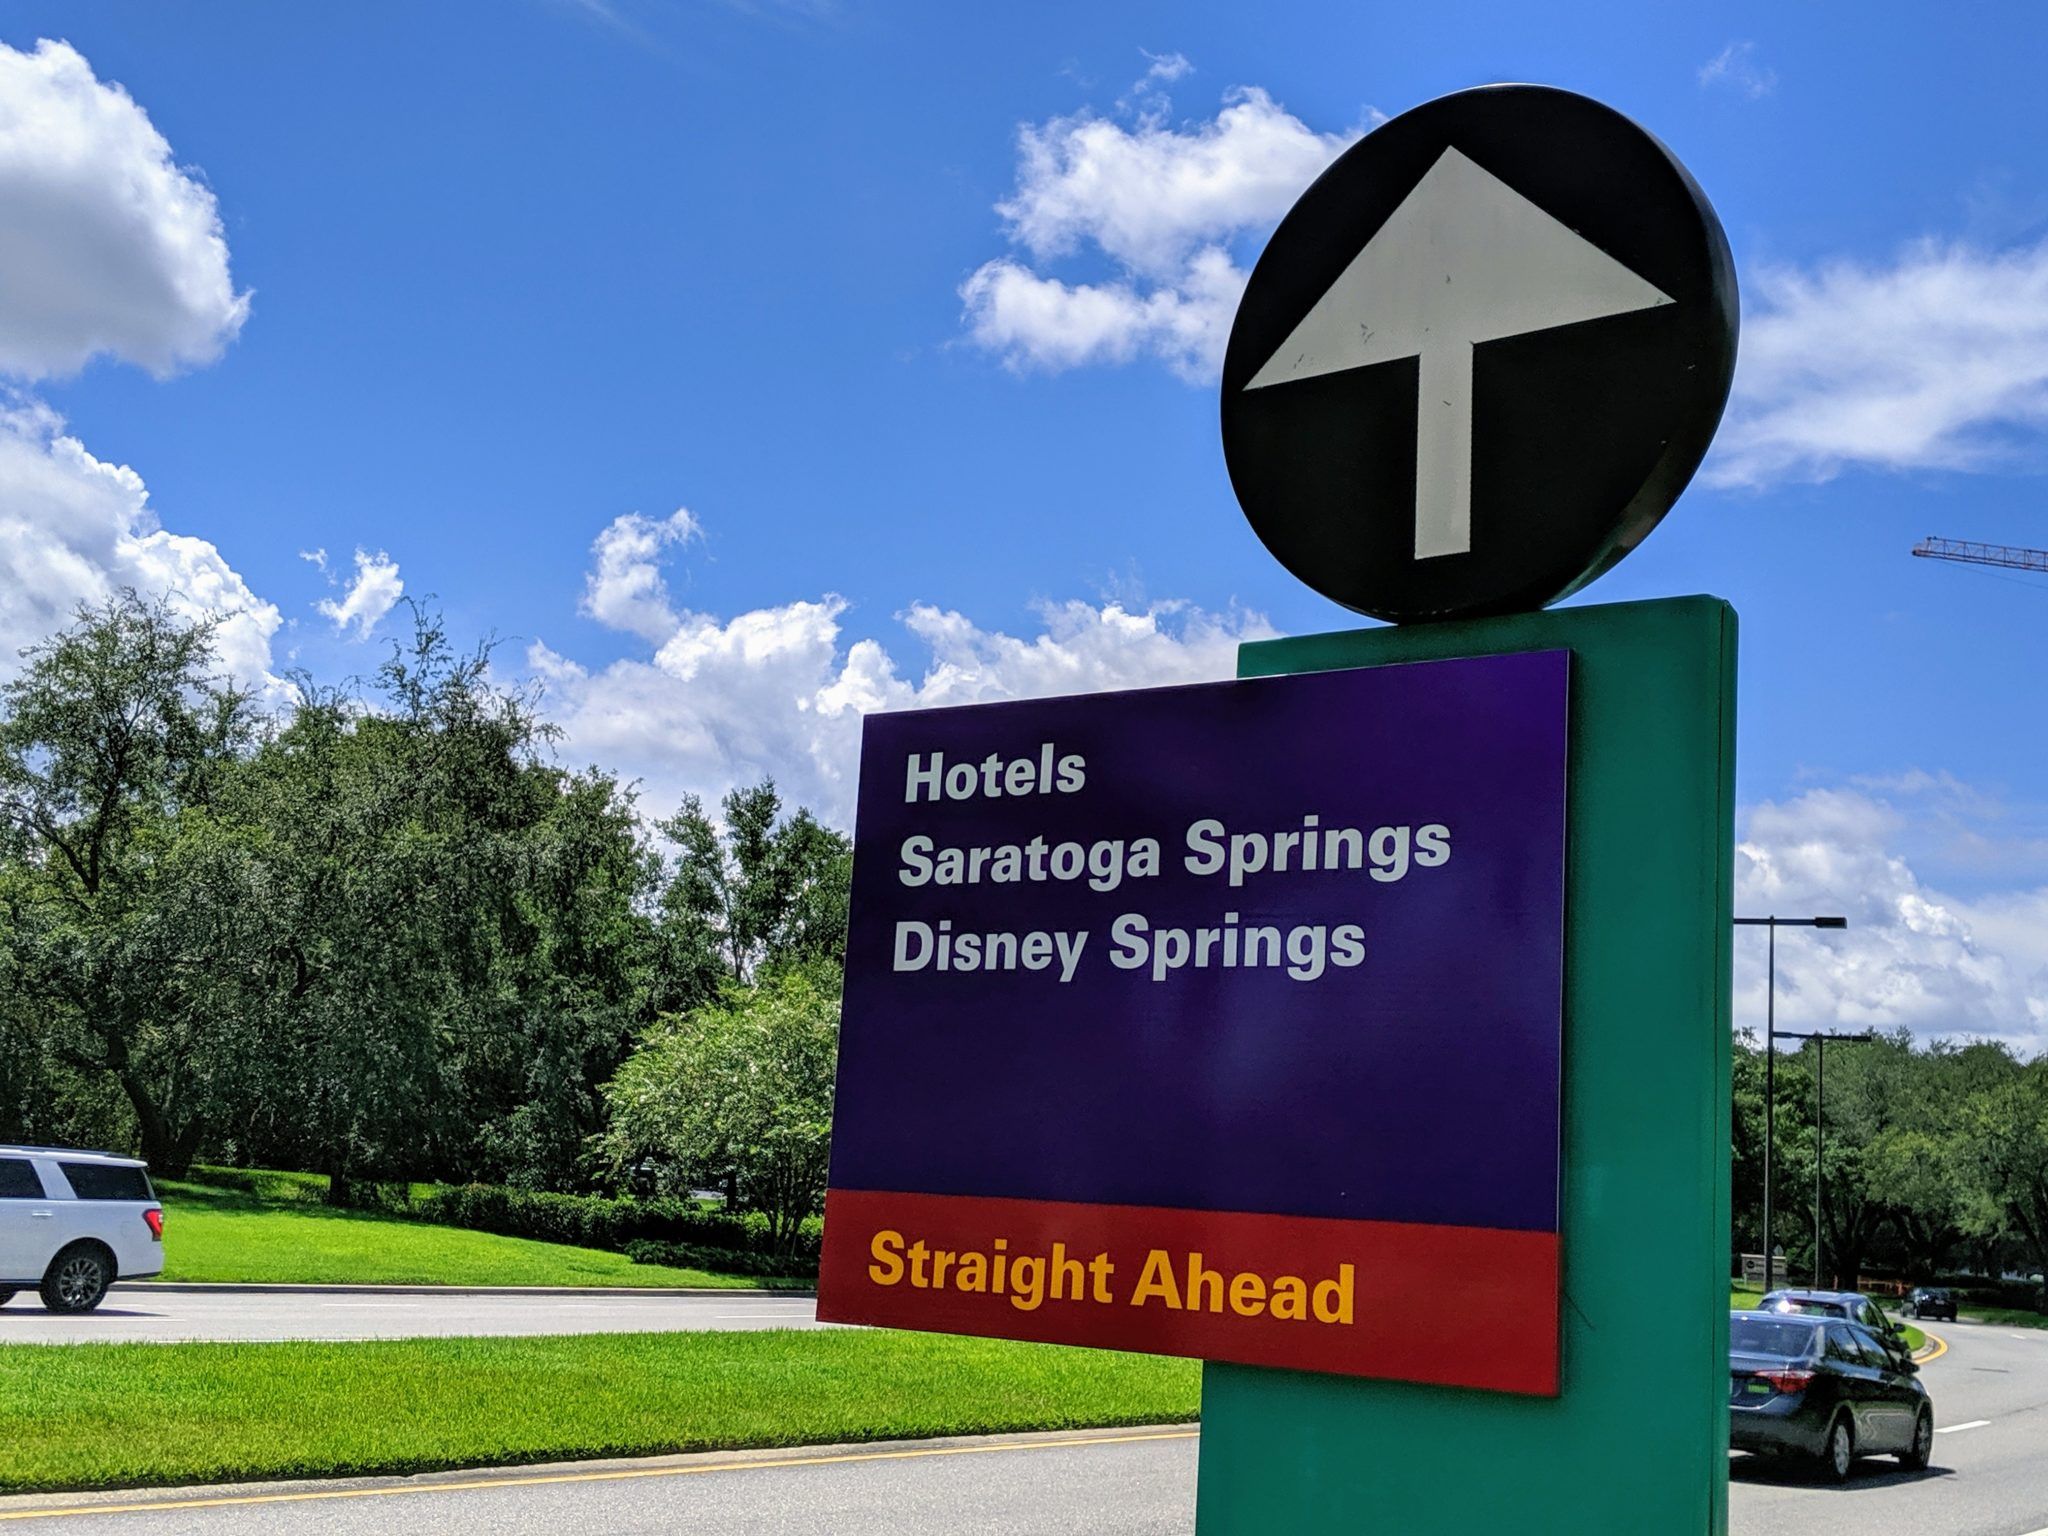 Road sign to Disney Springs